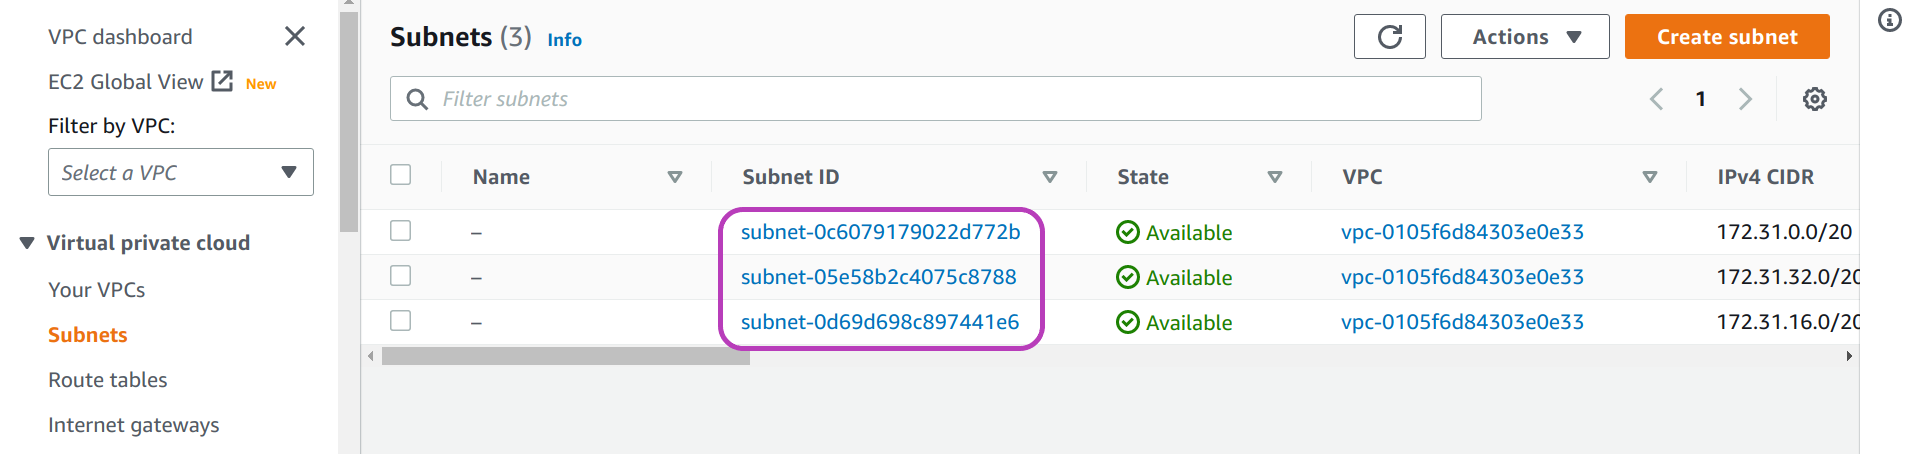 Screenshot of AWS Console Subnets page in a browser showing the resource IDs of the subnets available in the Ireland region, in the middle of the page, circled.